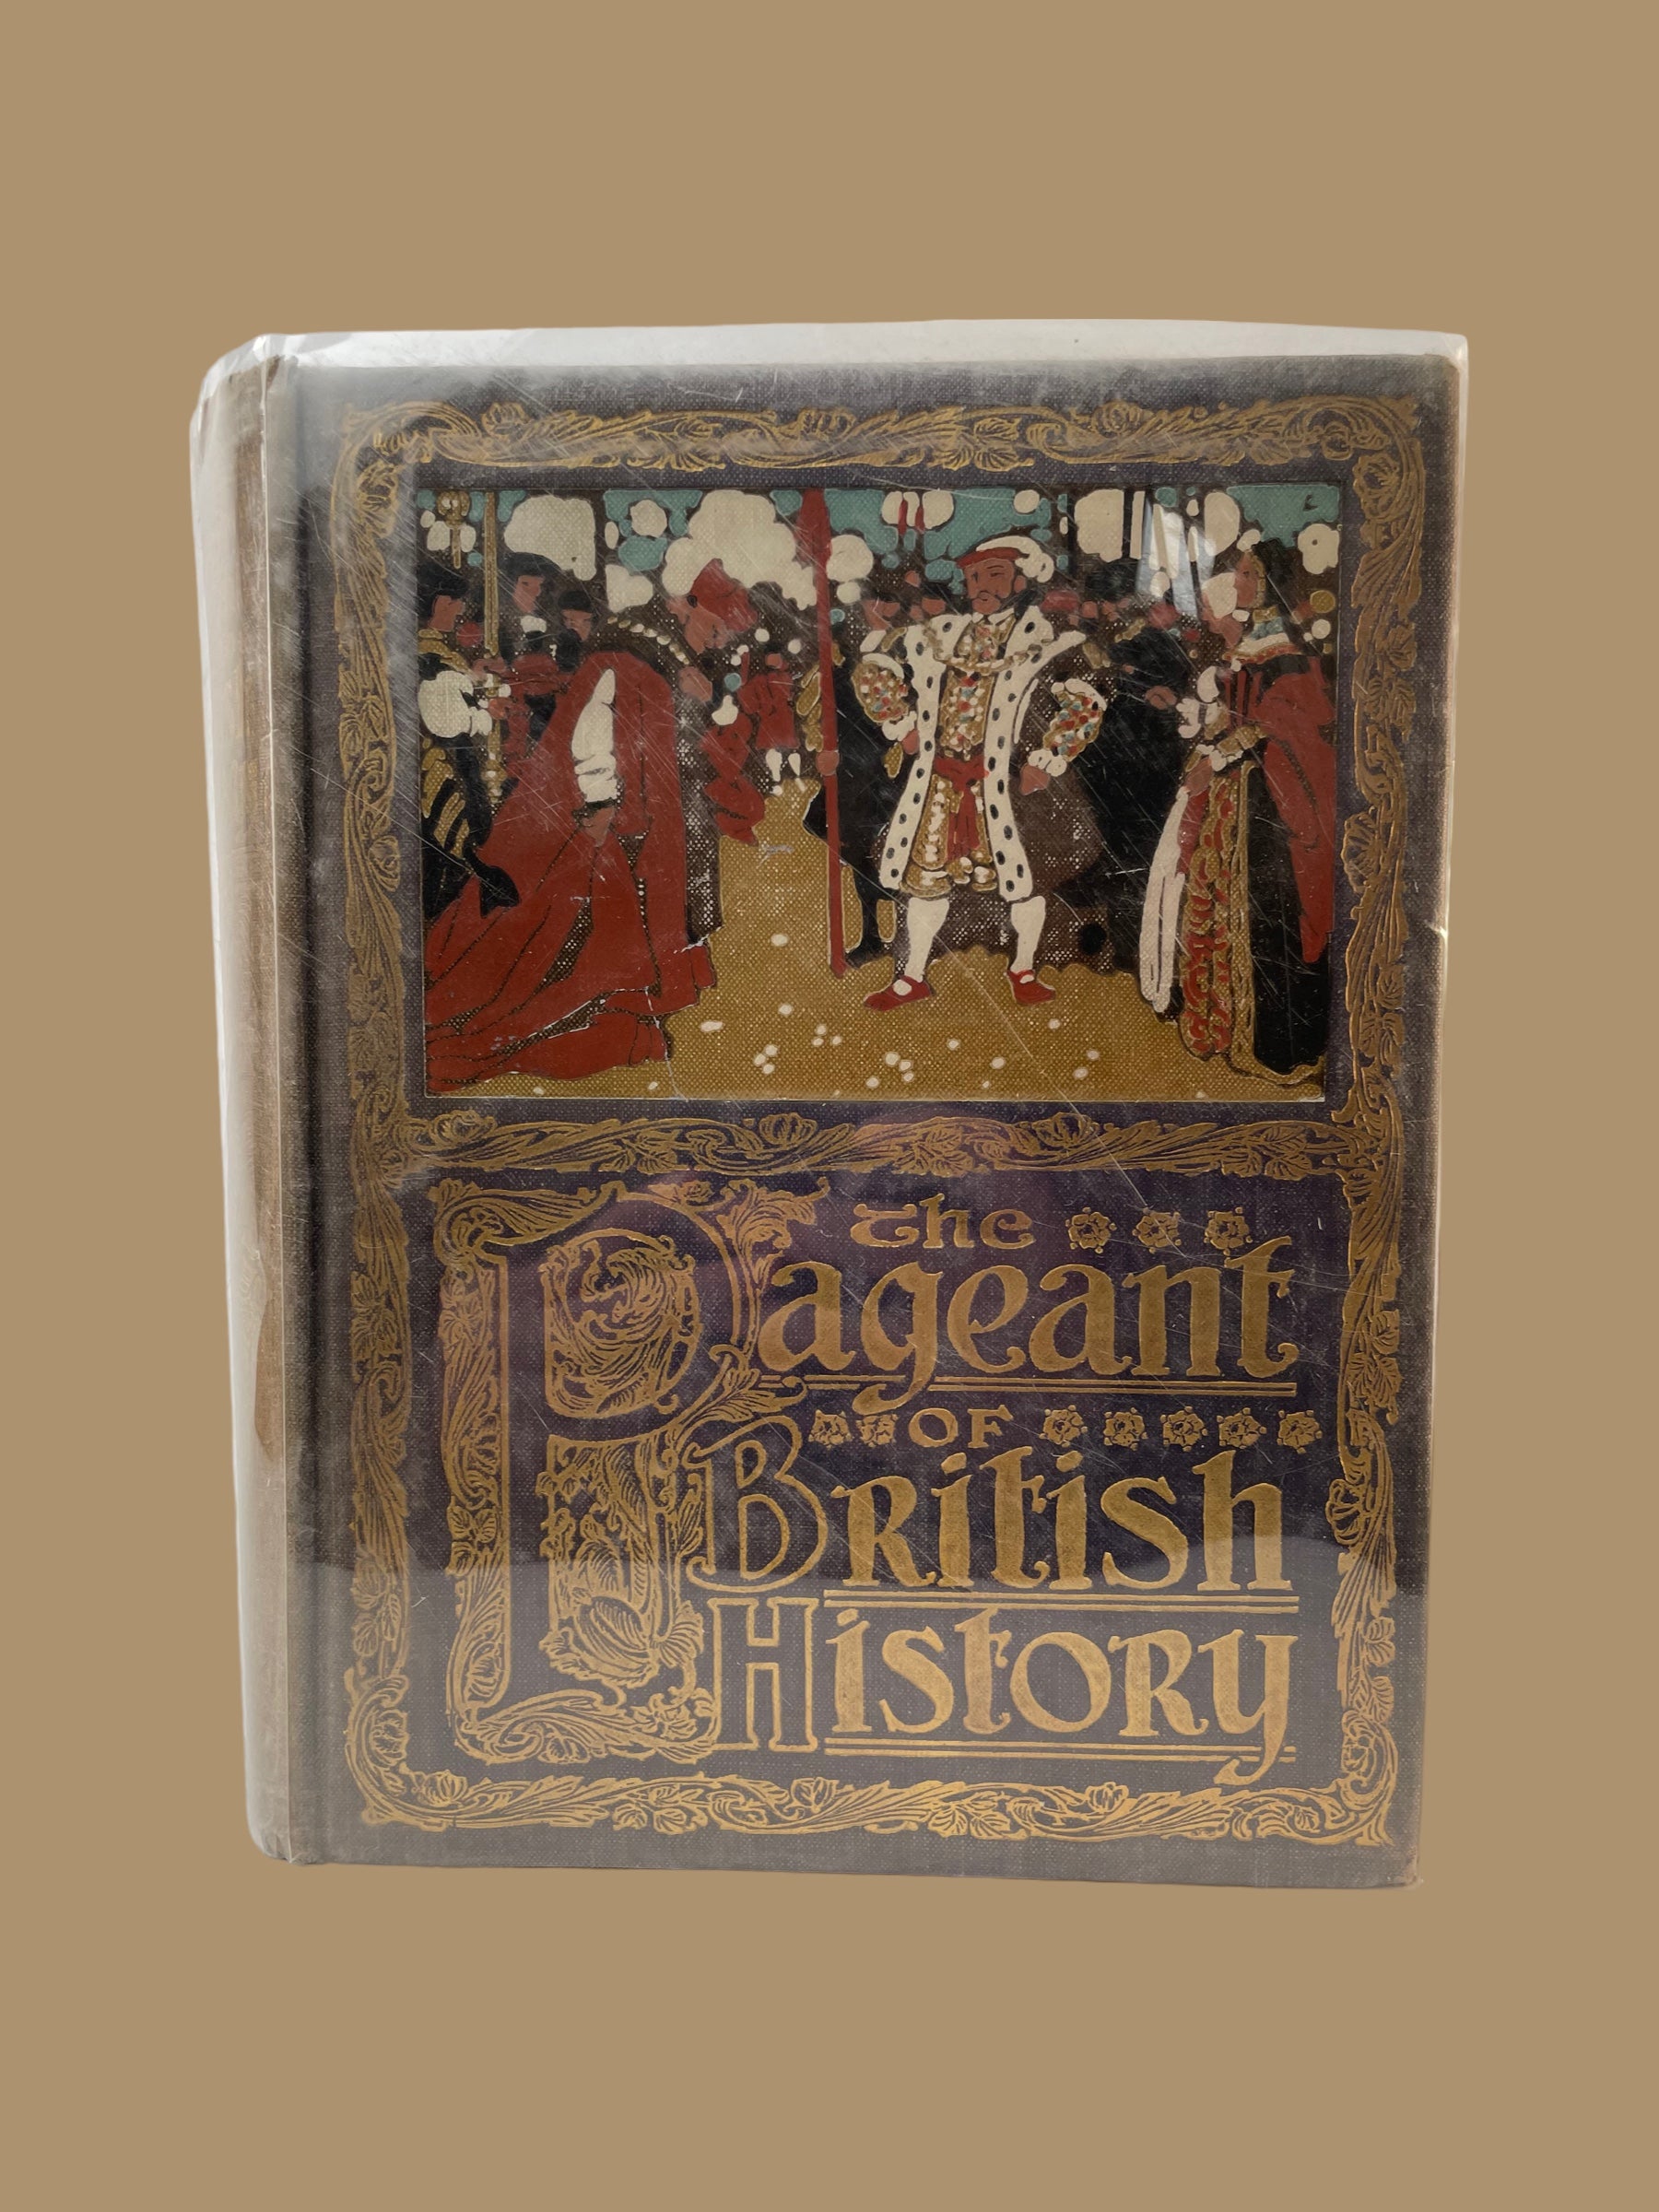 "The Pageant of British History" - 1908